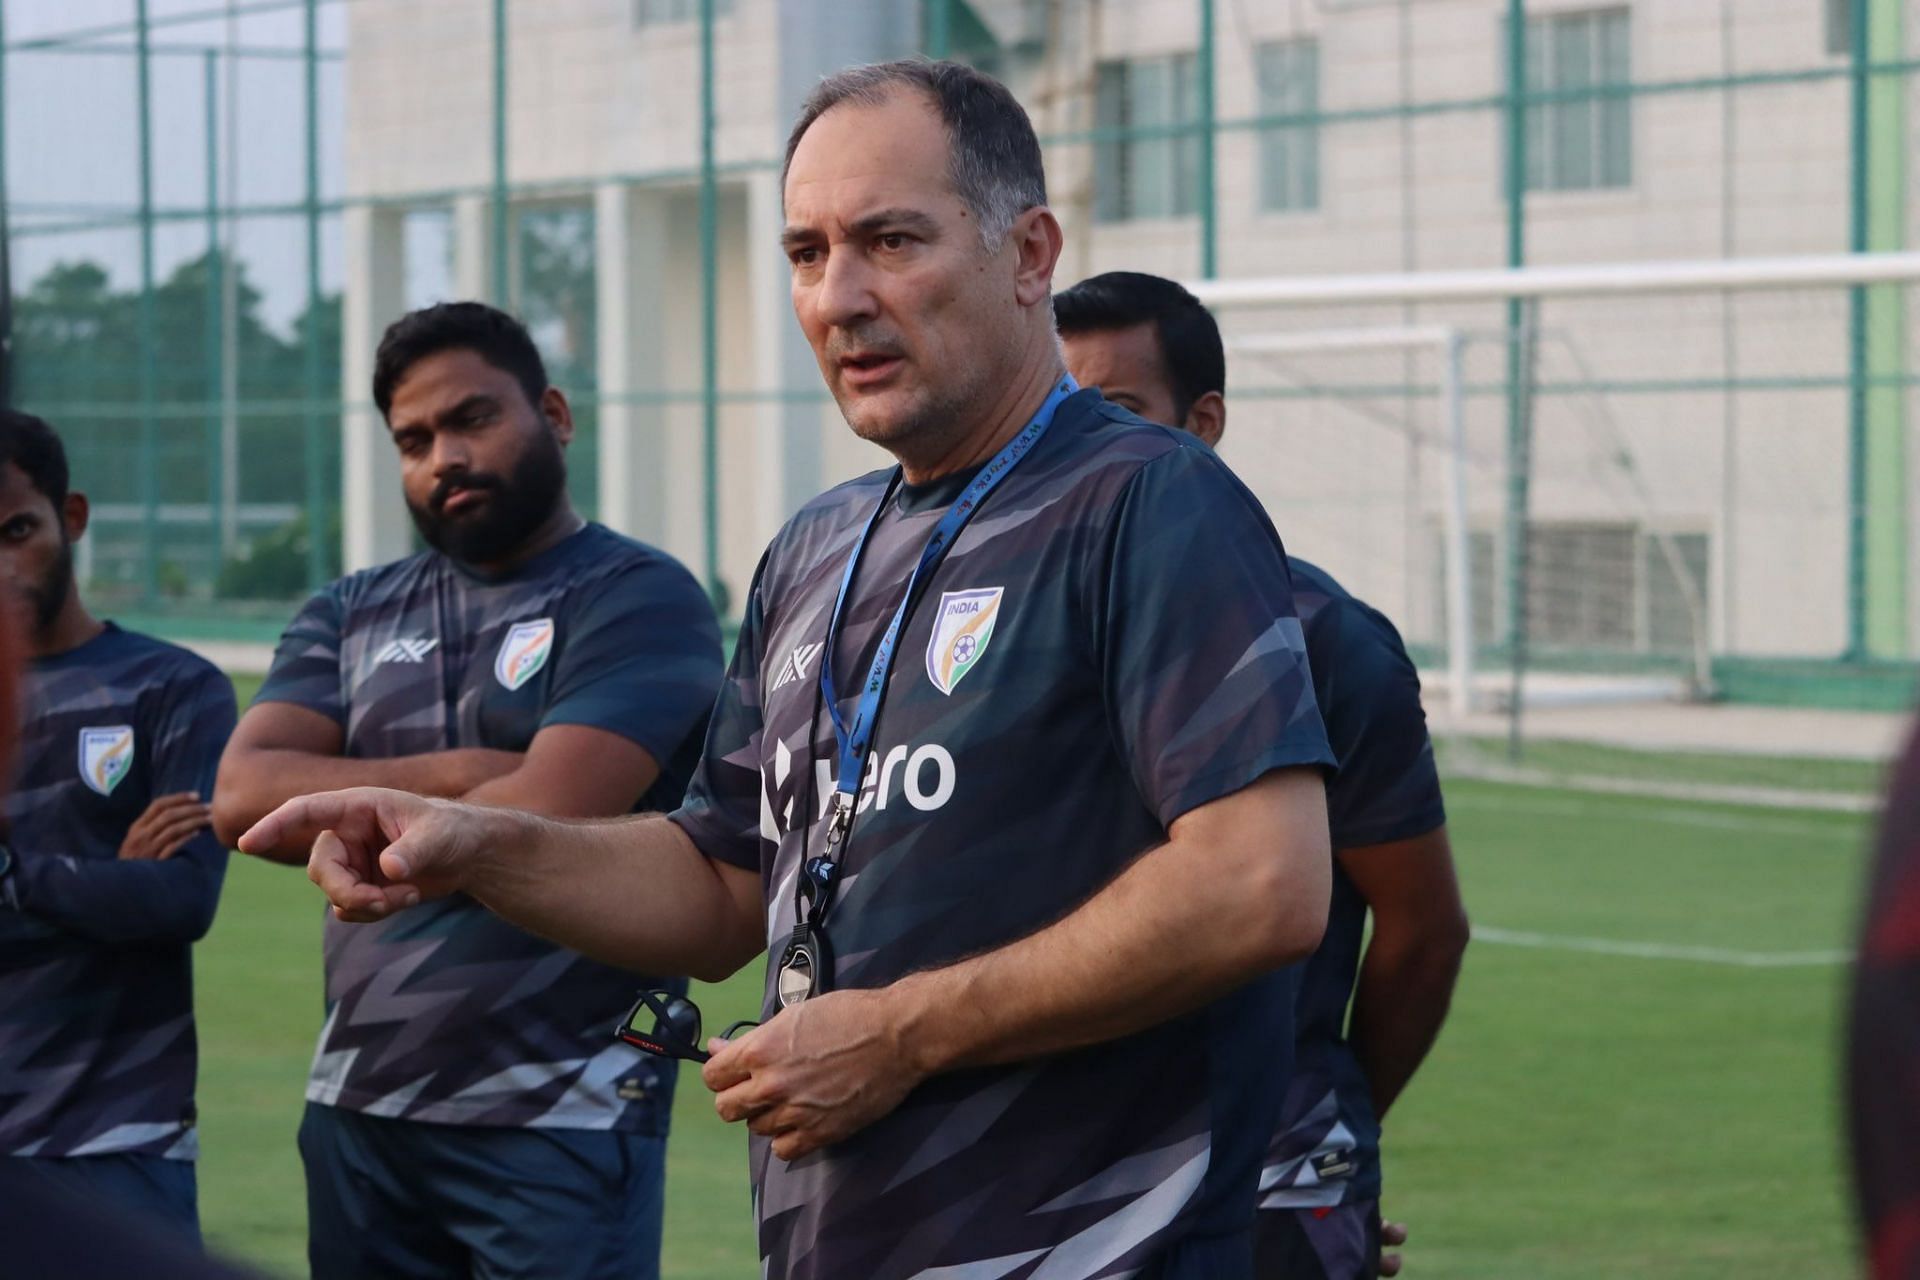 Igor Stimac joined the Indian national team as their head coach in May 2019.